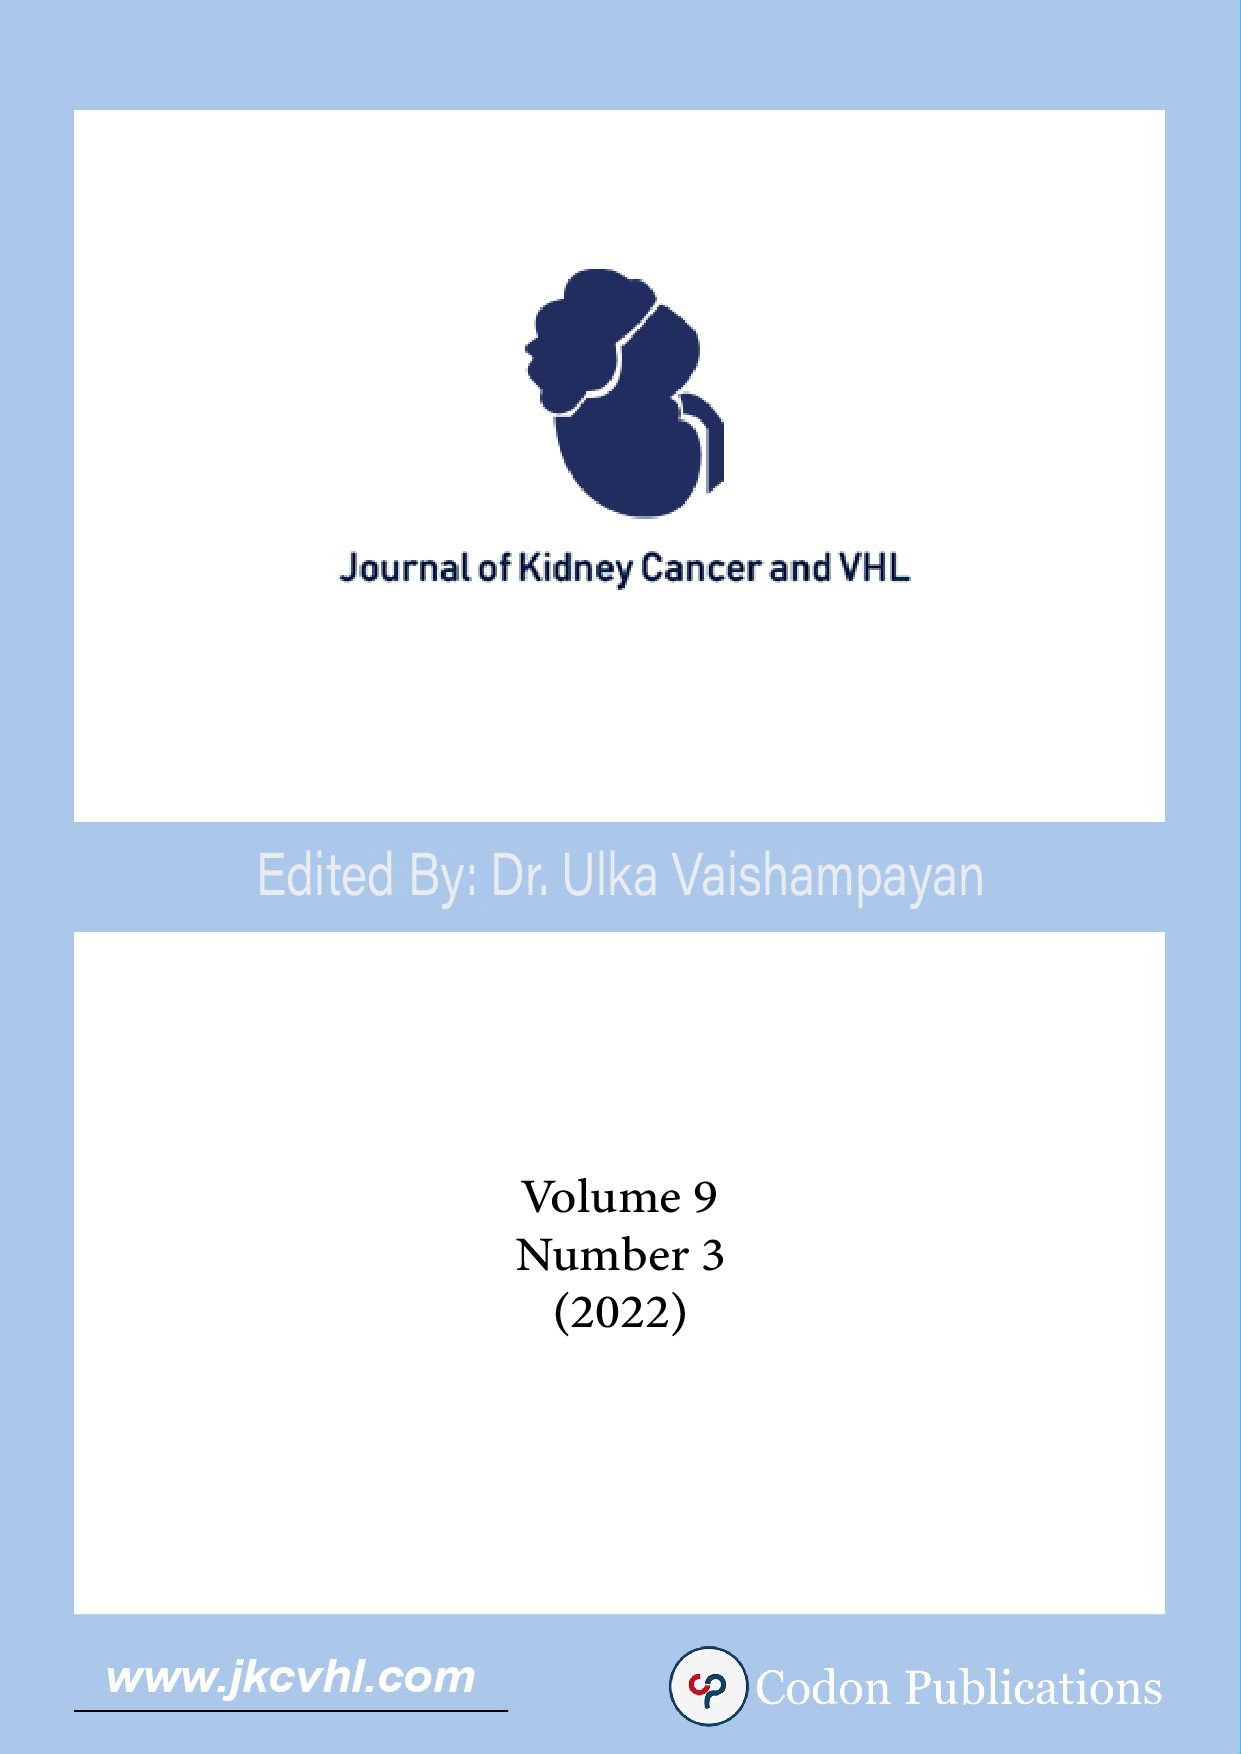 					View Vol. 9 No. 3 (2022): Journal of Kidney Cancer and VHL
				